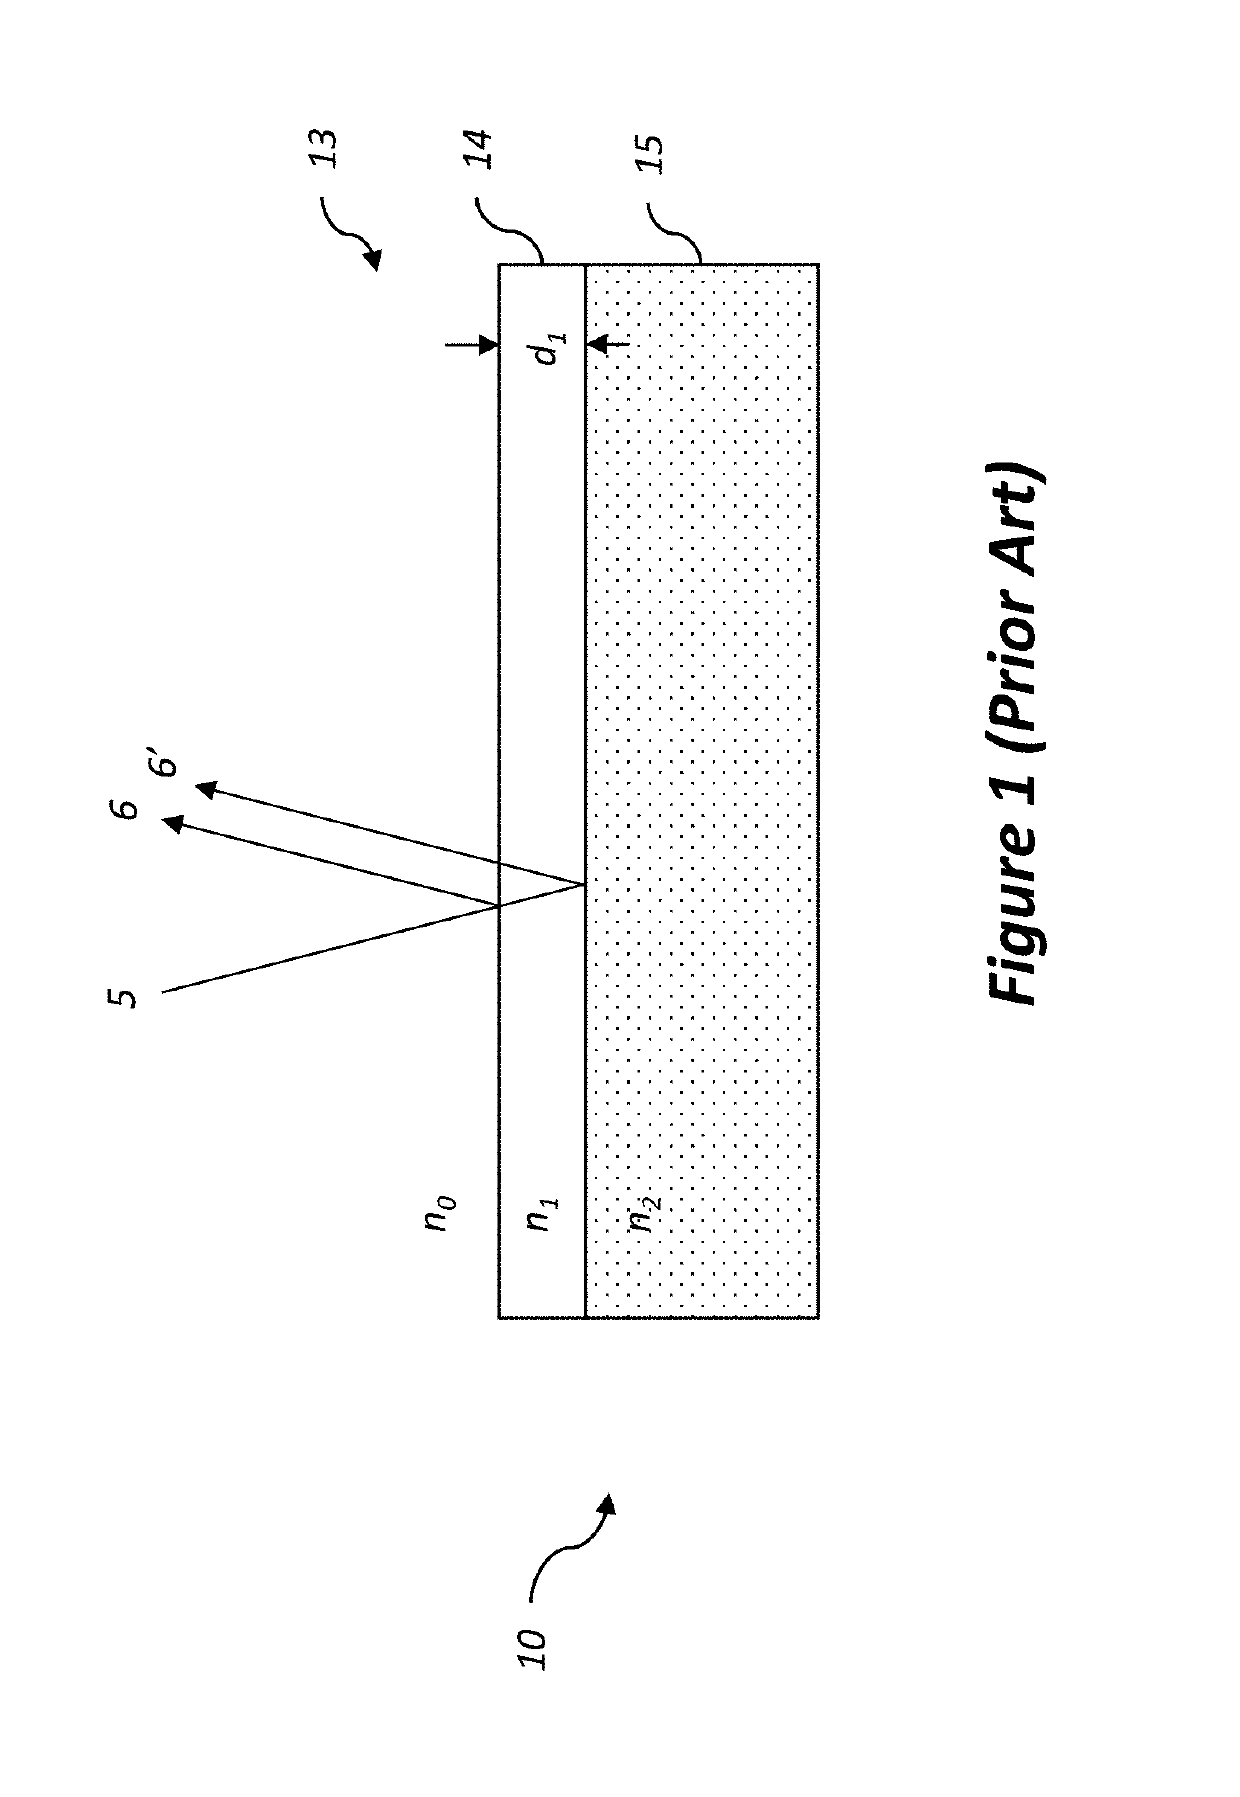 Electronic element with embedded information